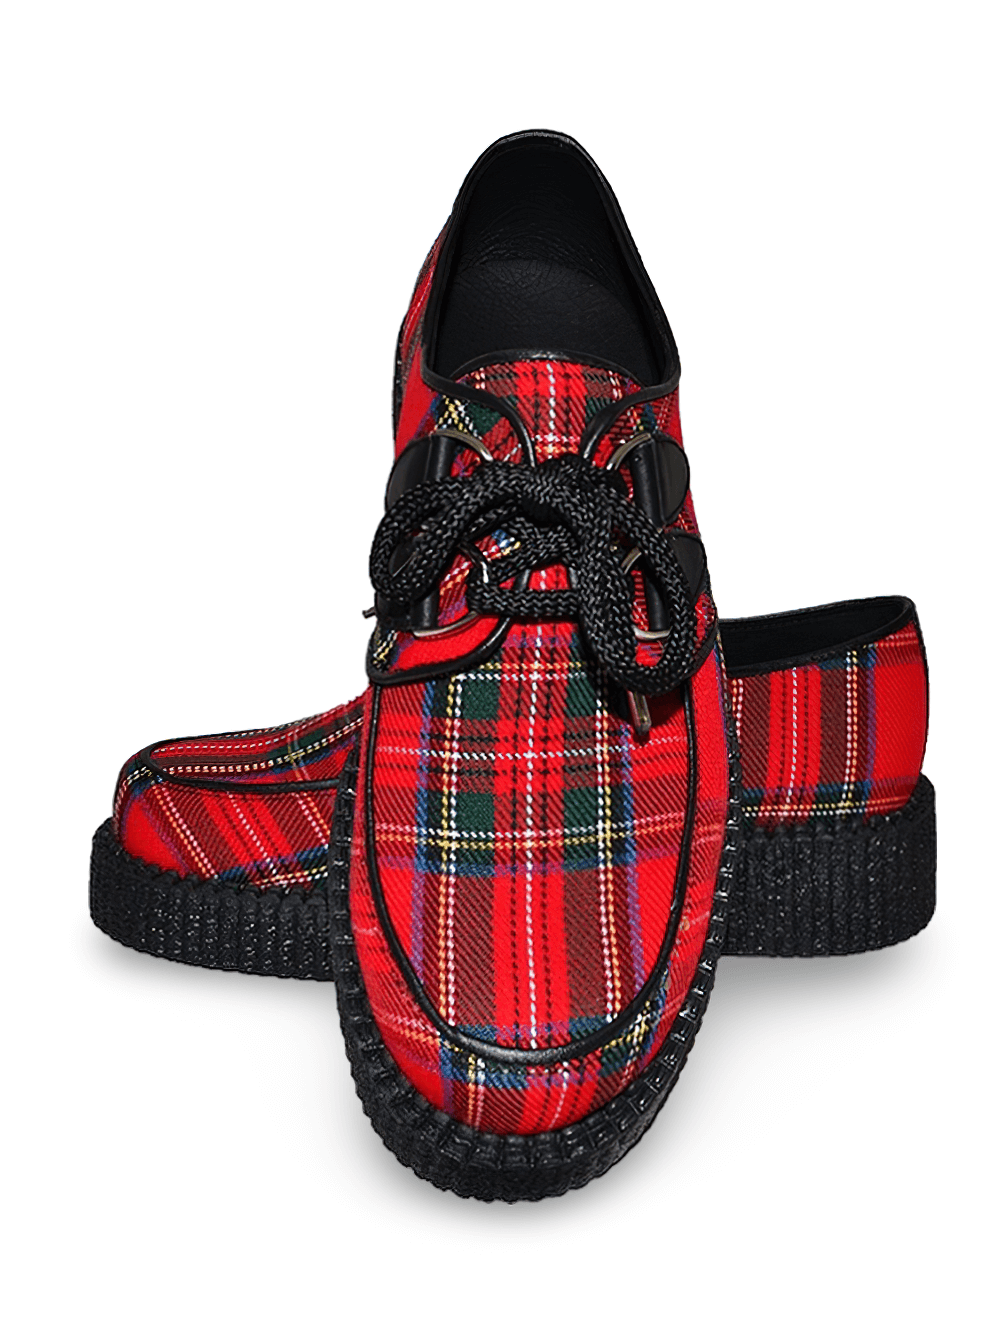 Red Tartan Creepers with Black Accents and Rubber Sole